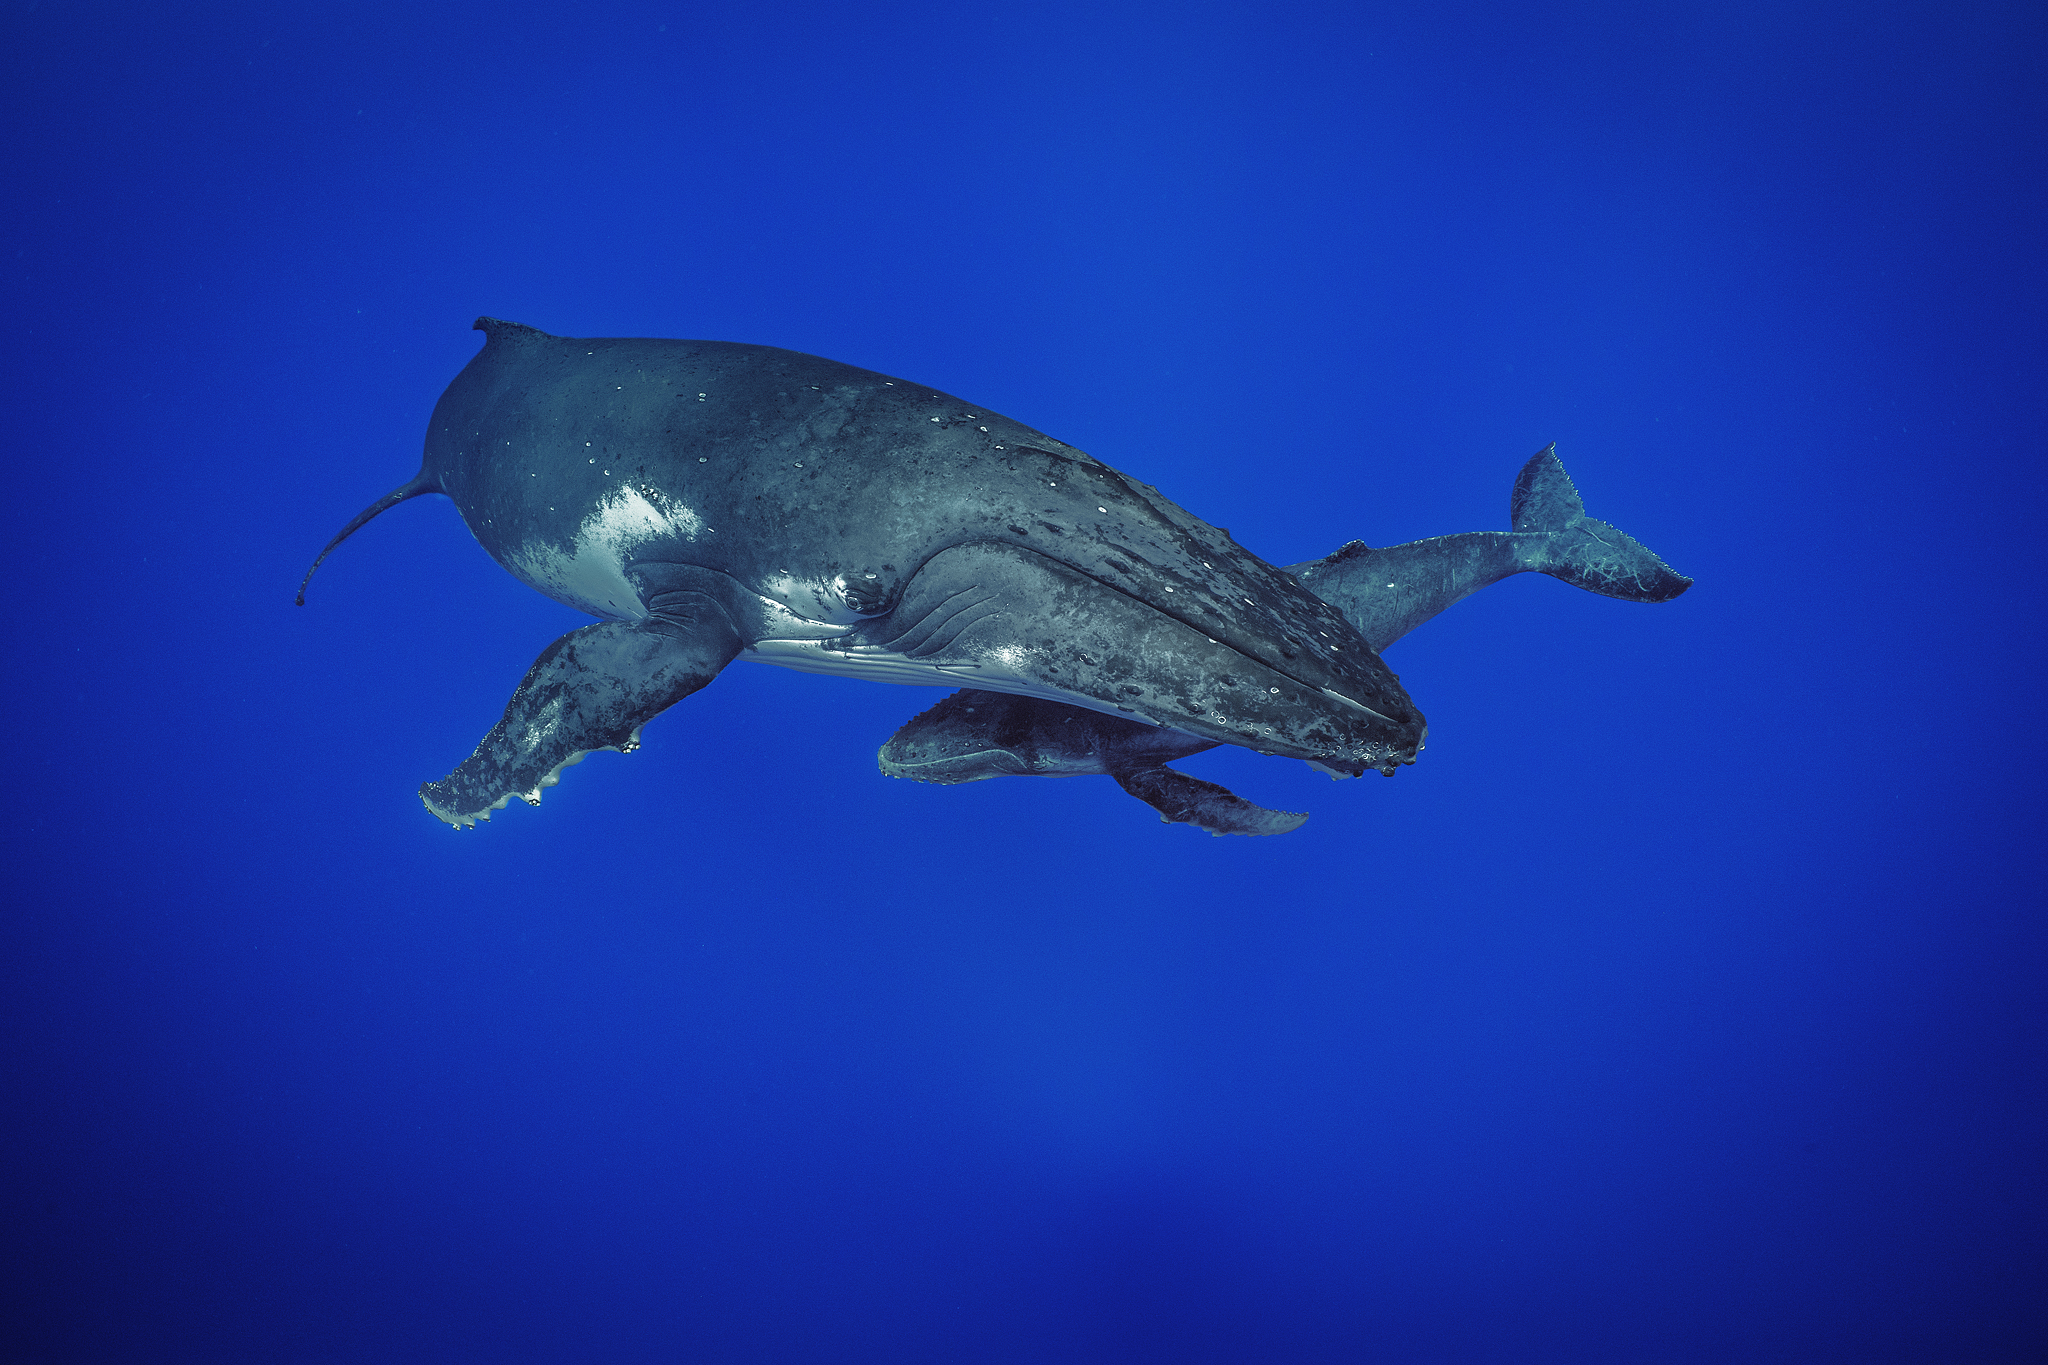 A mother Humpback Whale with her calf